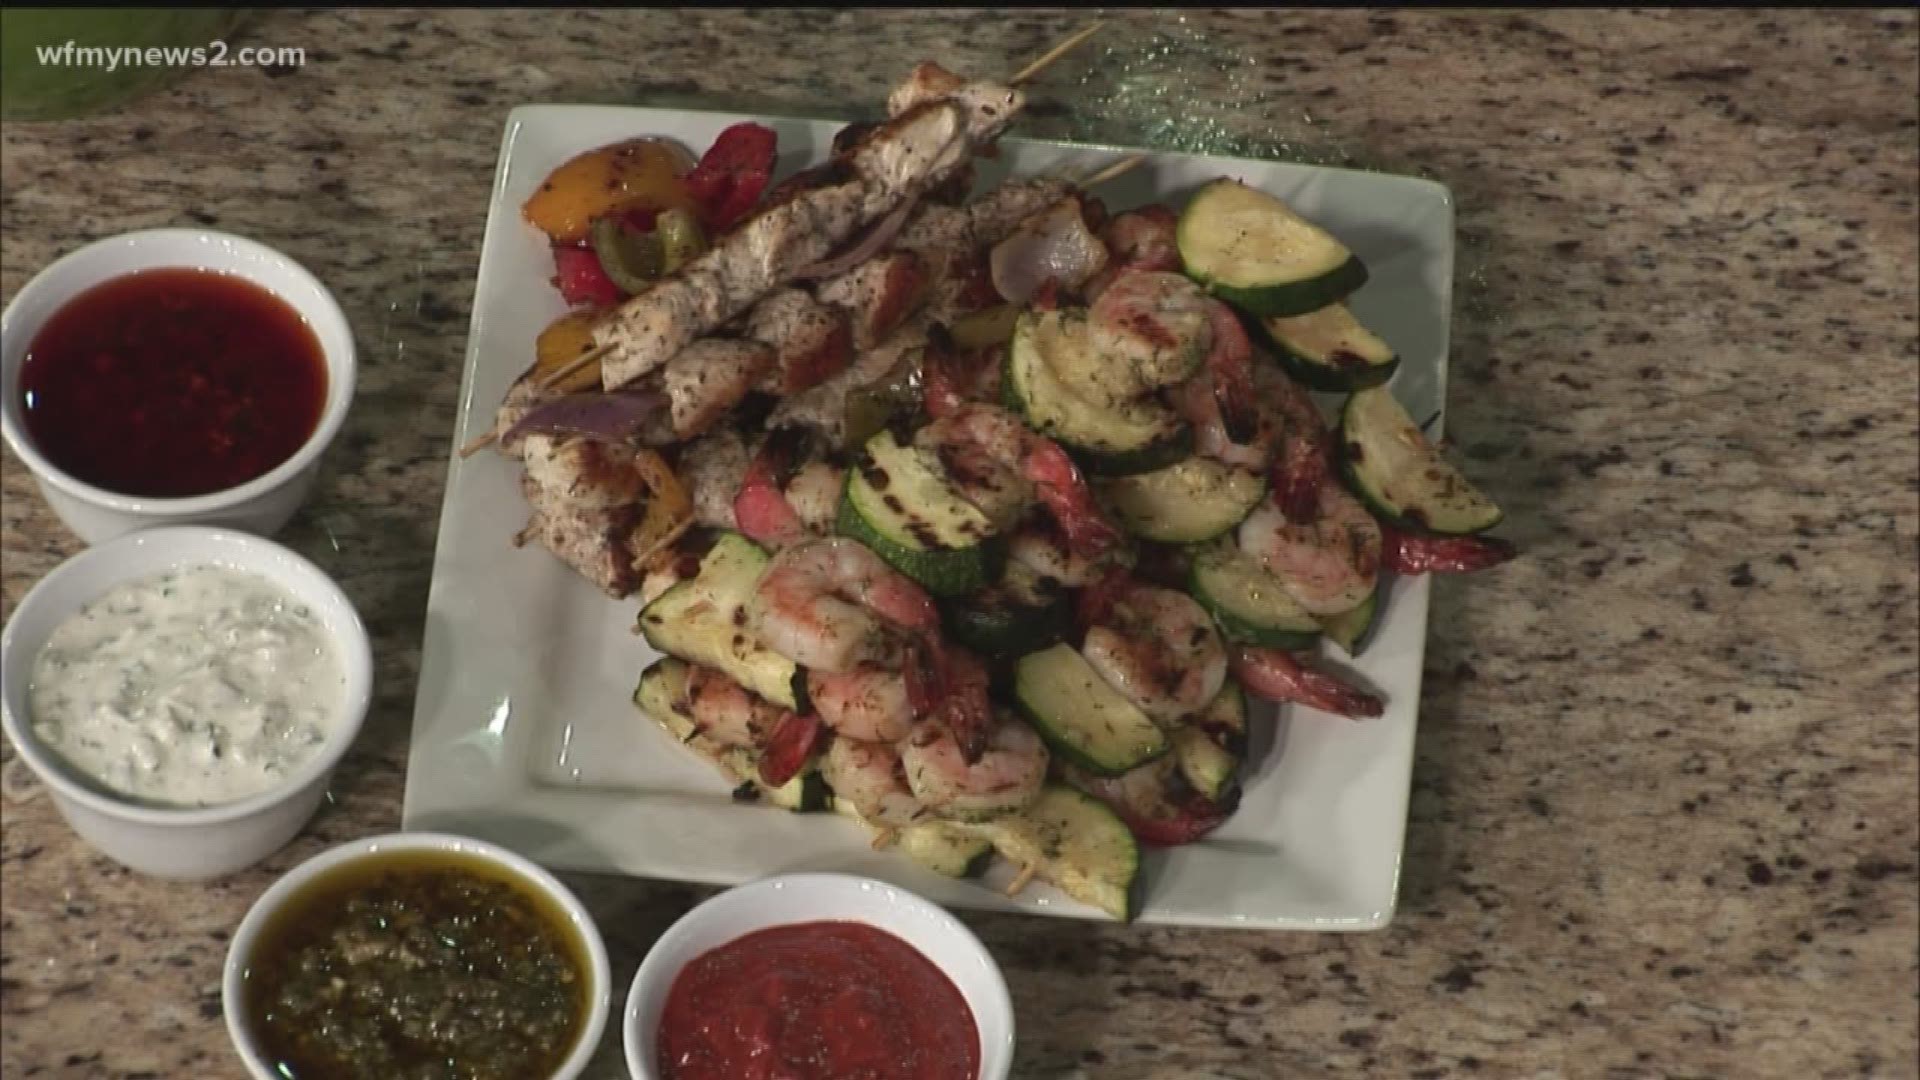 Erin Williams is back in studio to teach us how to spice up our Saturday with Shrimp Kabobs.